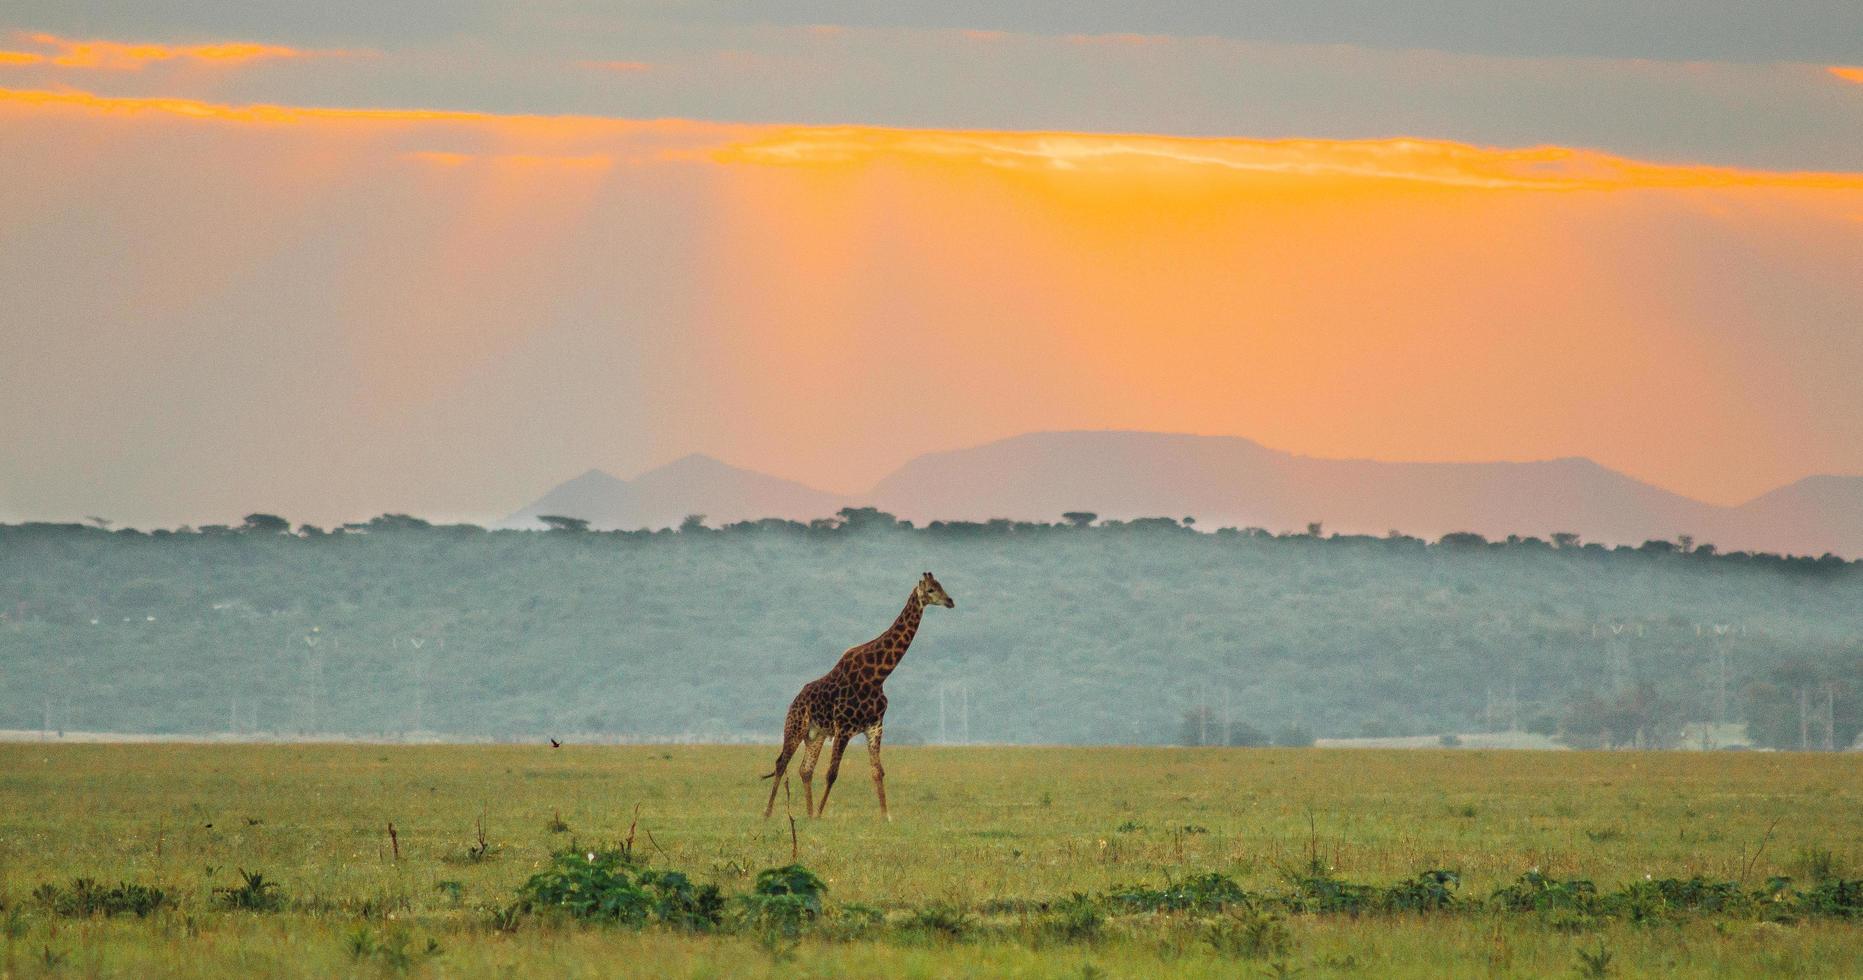 Giraffe in the distance at sunset photo